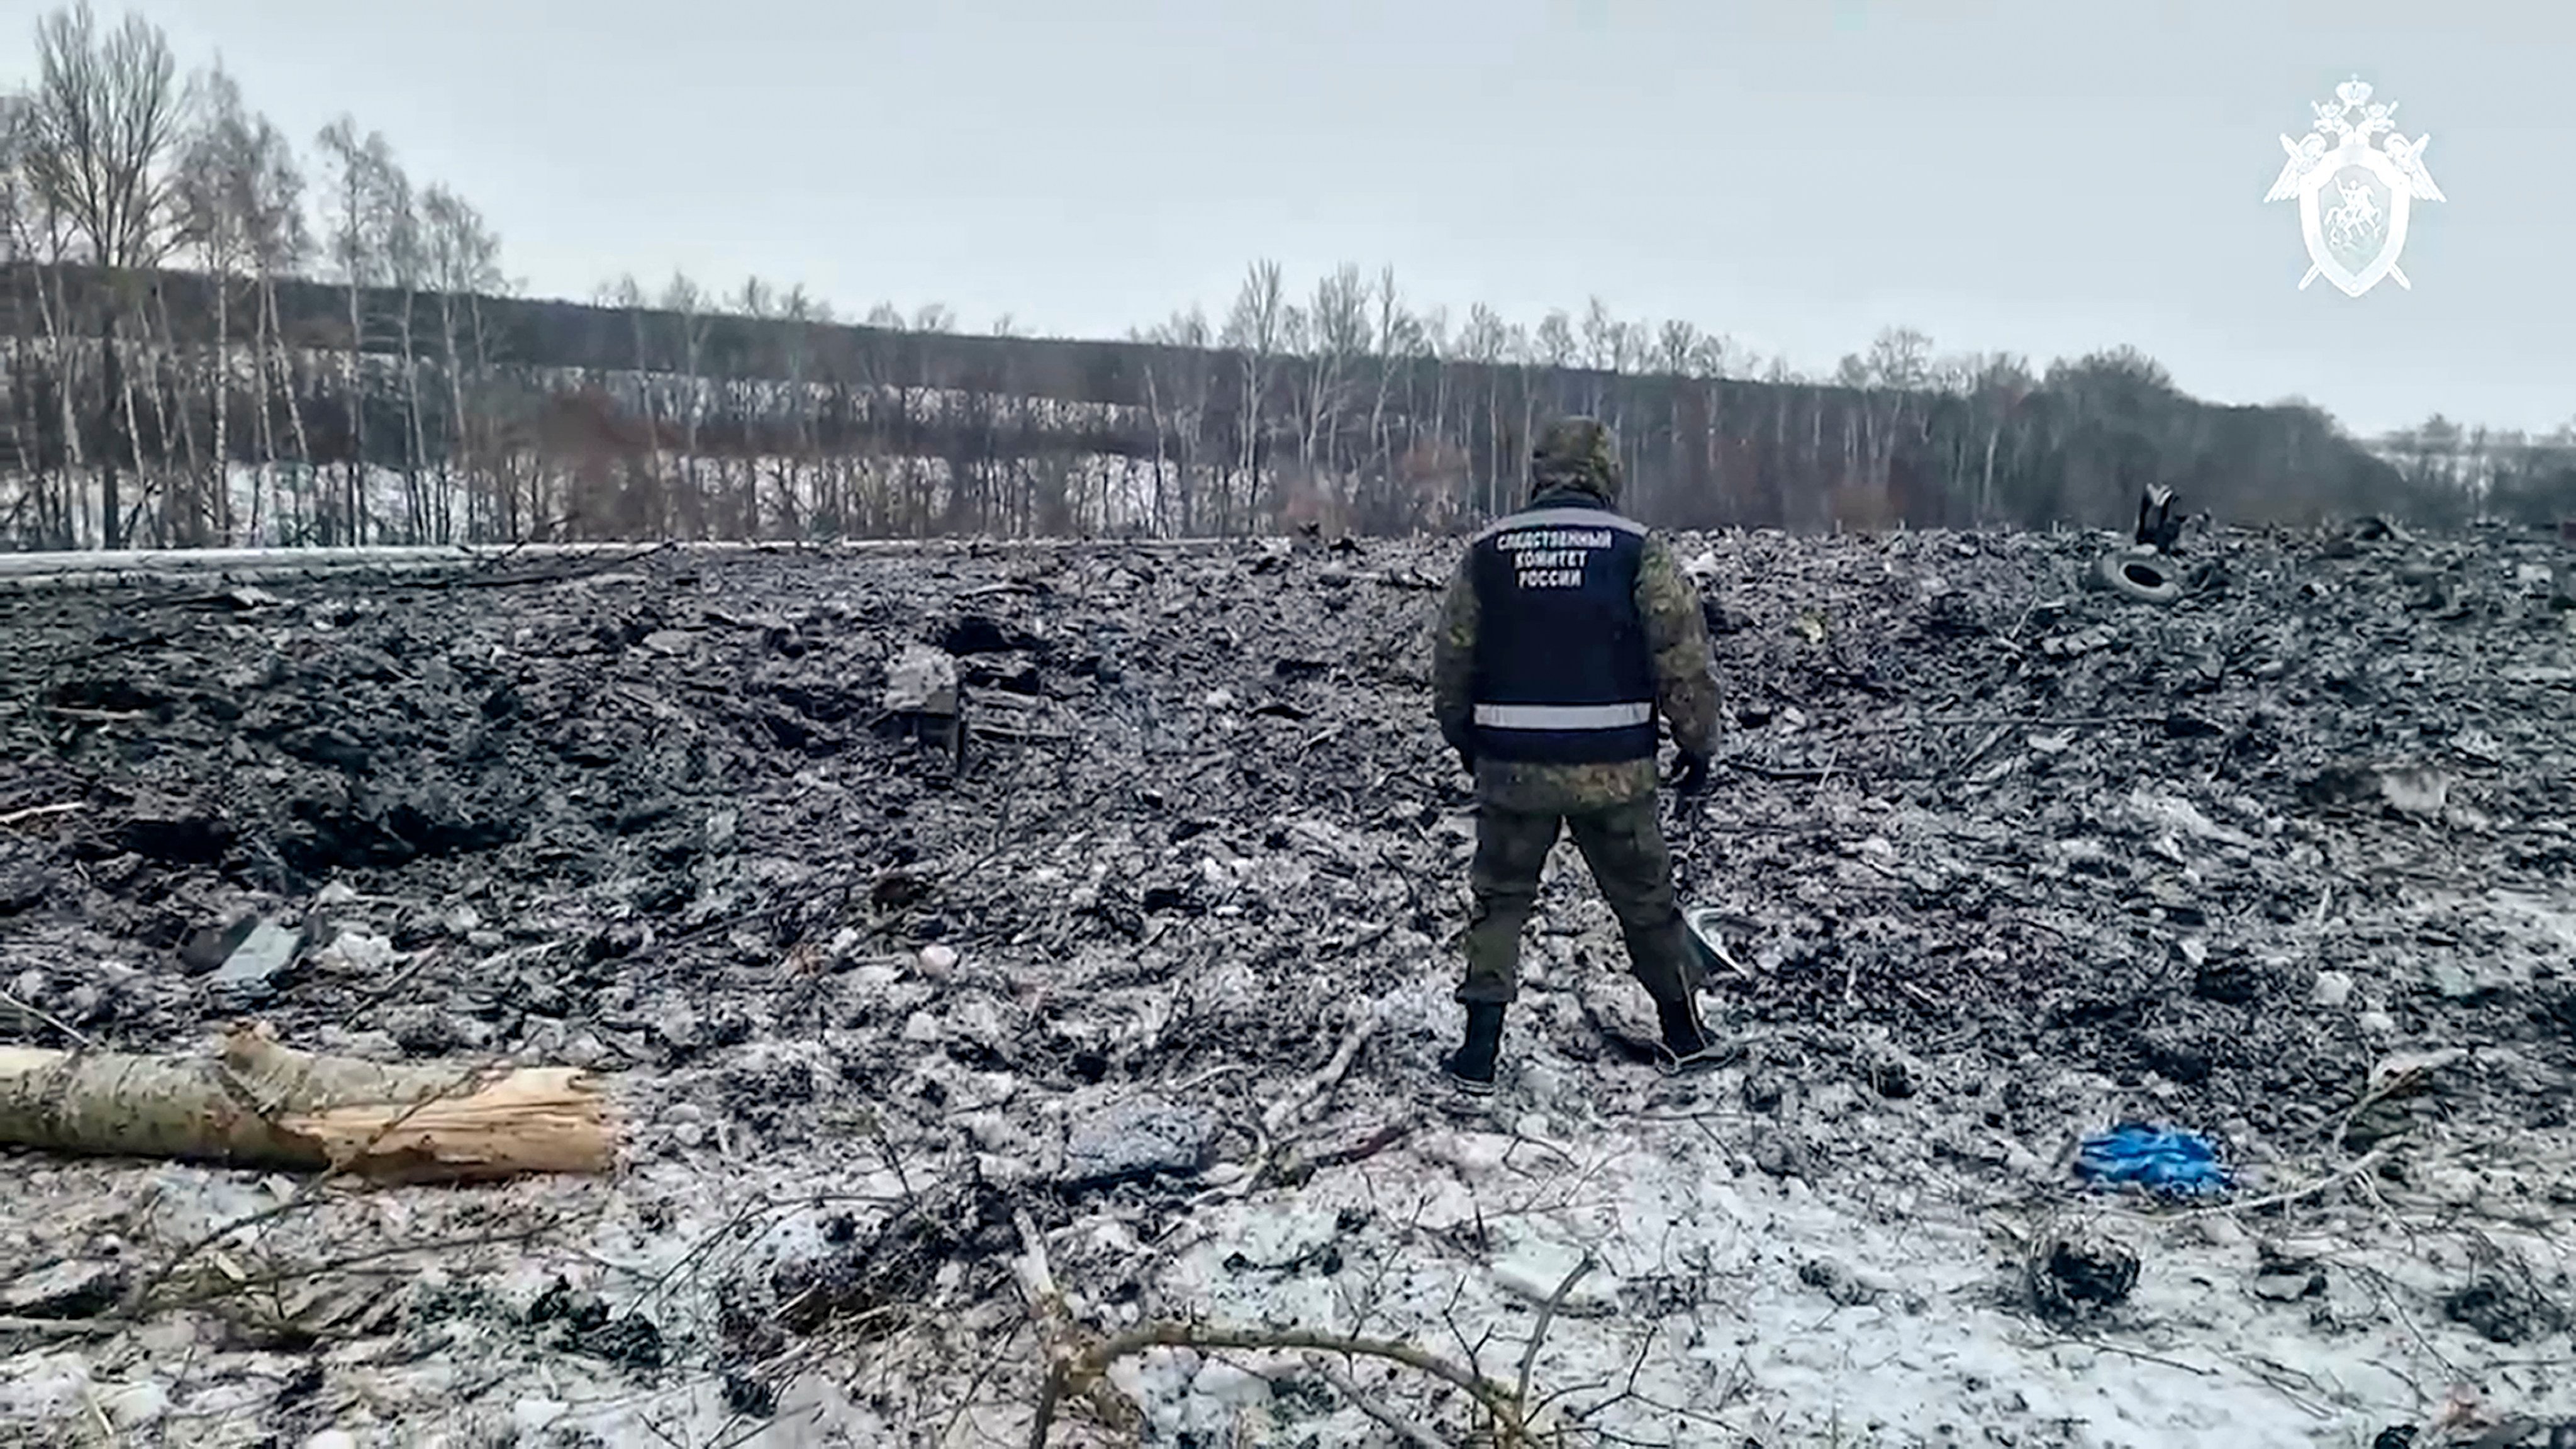 A Russian Investigative Committee employee walks by the wreckage of the Il-76 near Yablonovo, in the Belgorod region of Russia on Thursday. Photo: Russian Investigative Committee via AP